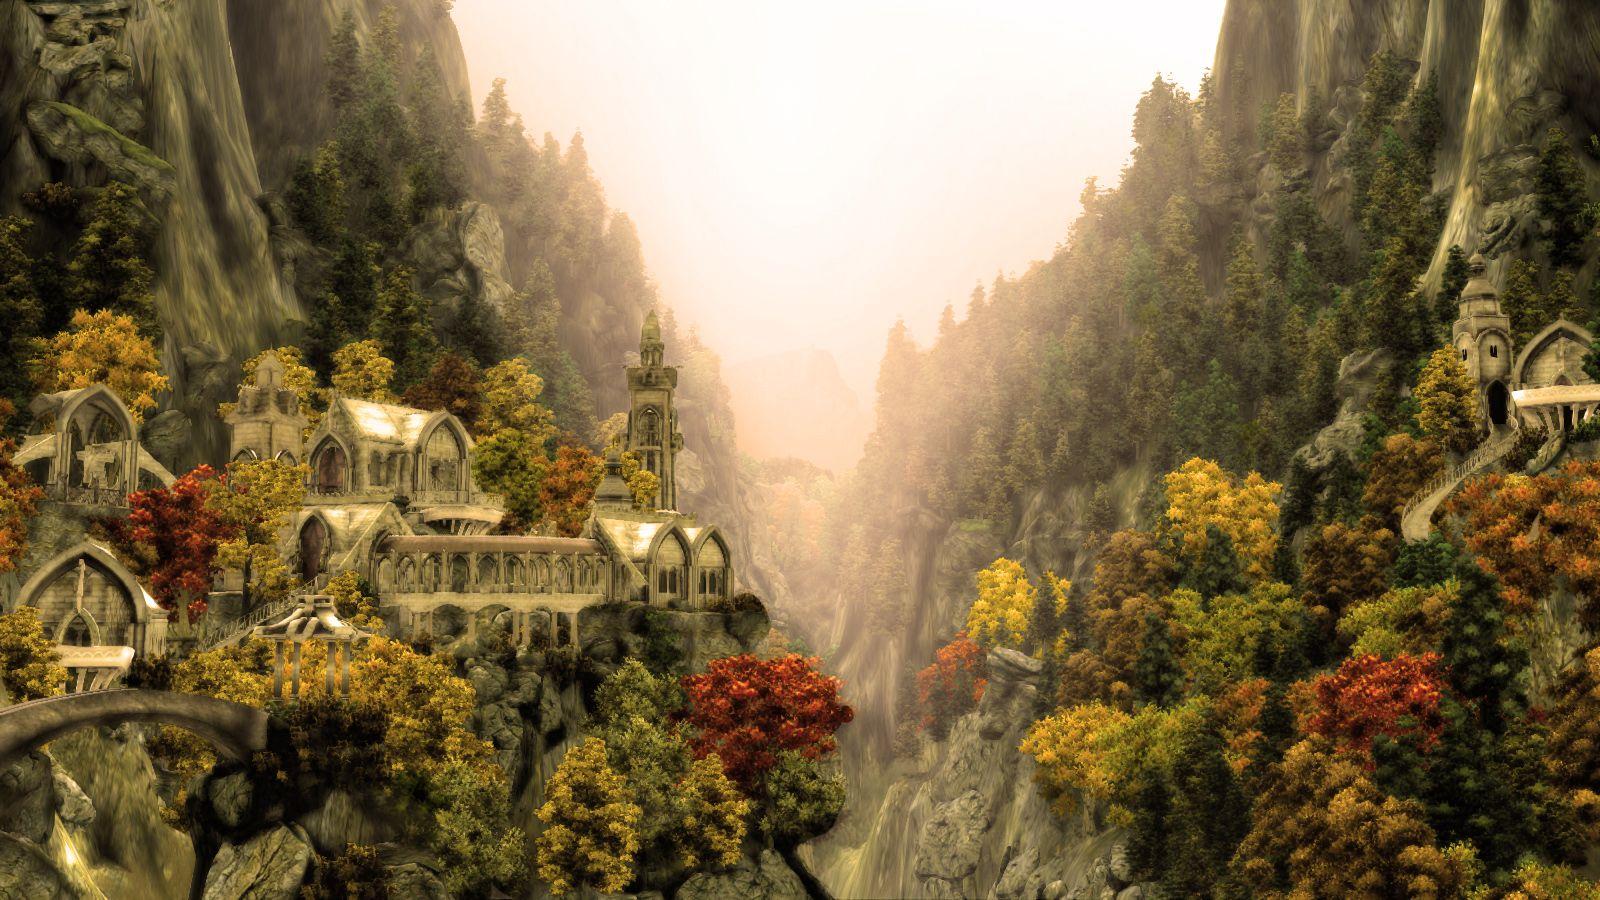 Rivendell Wallpaper Picture to